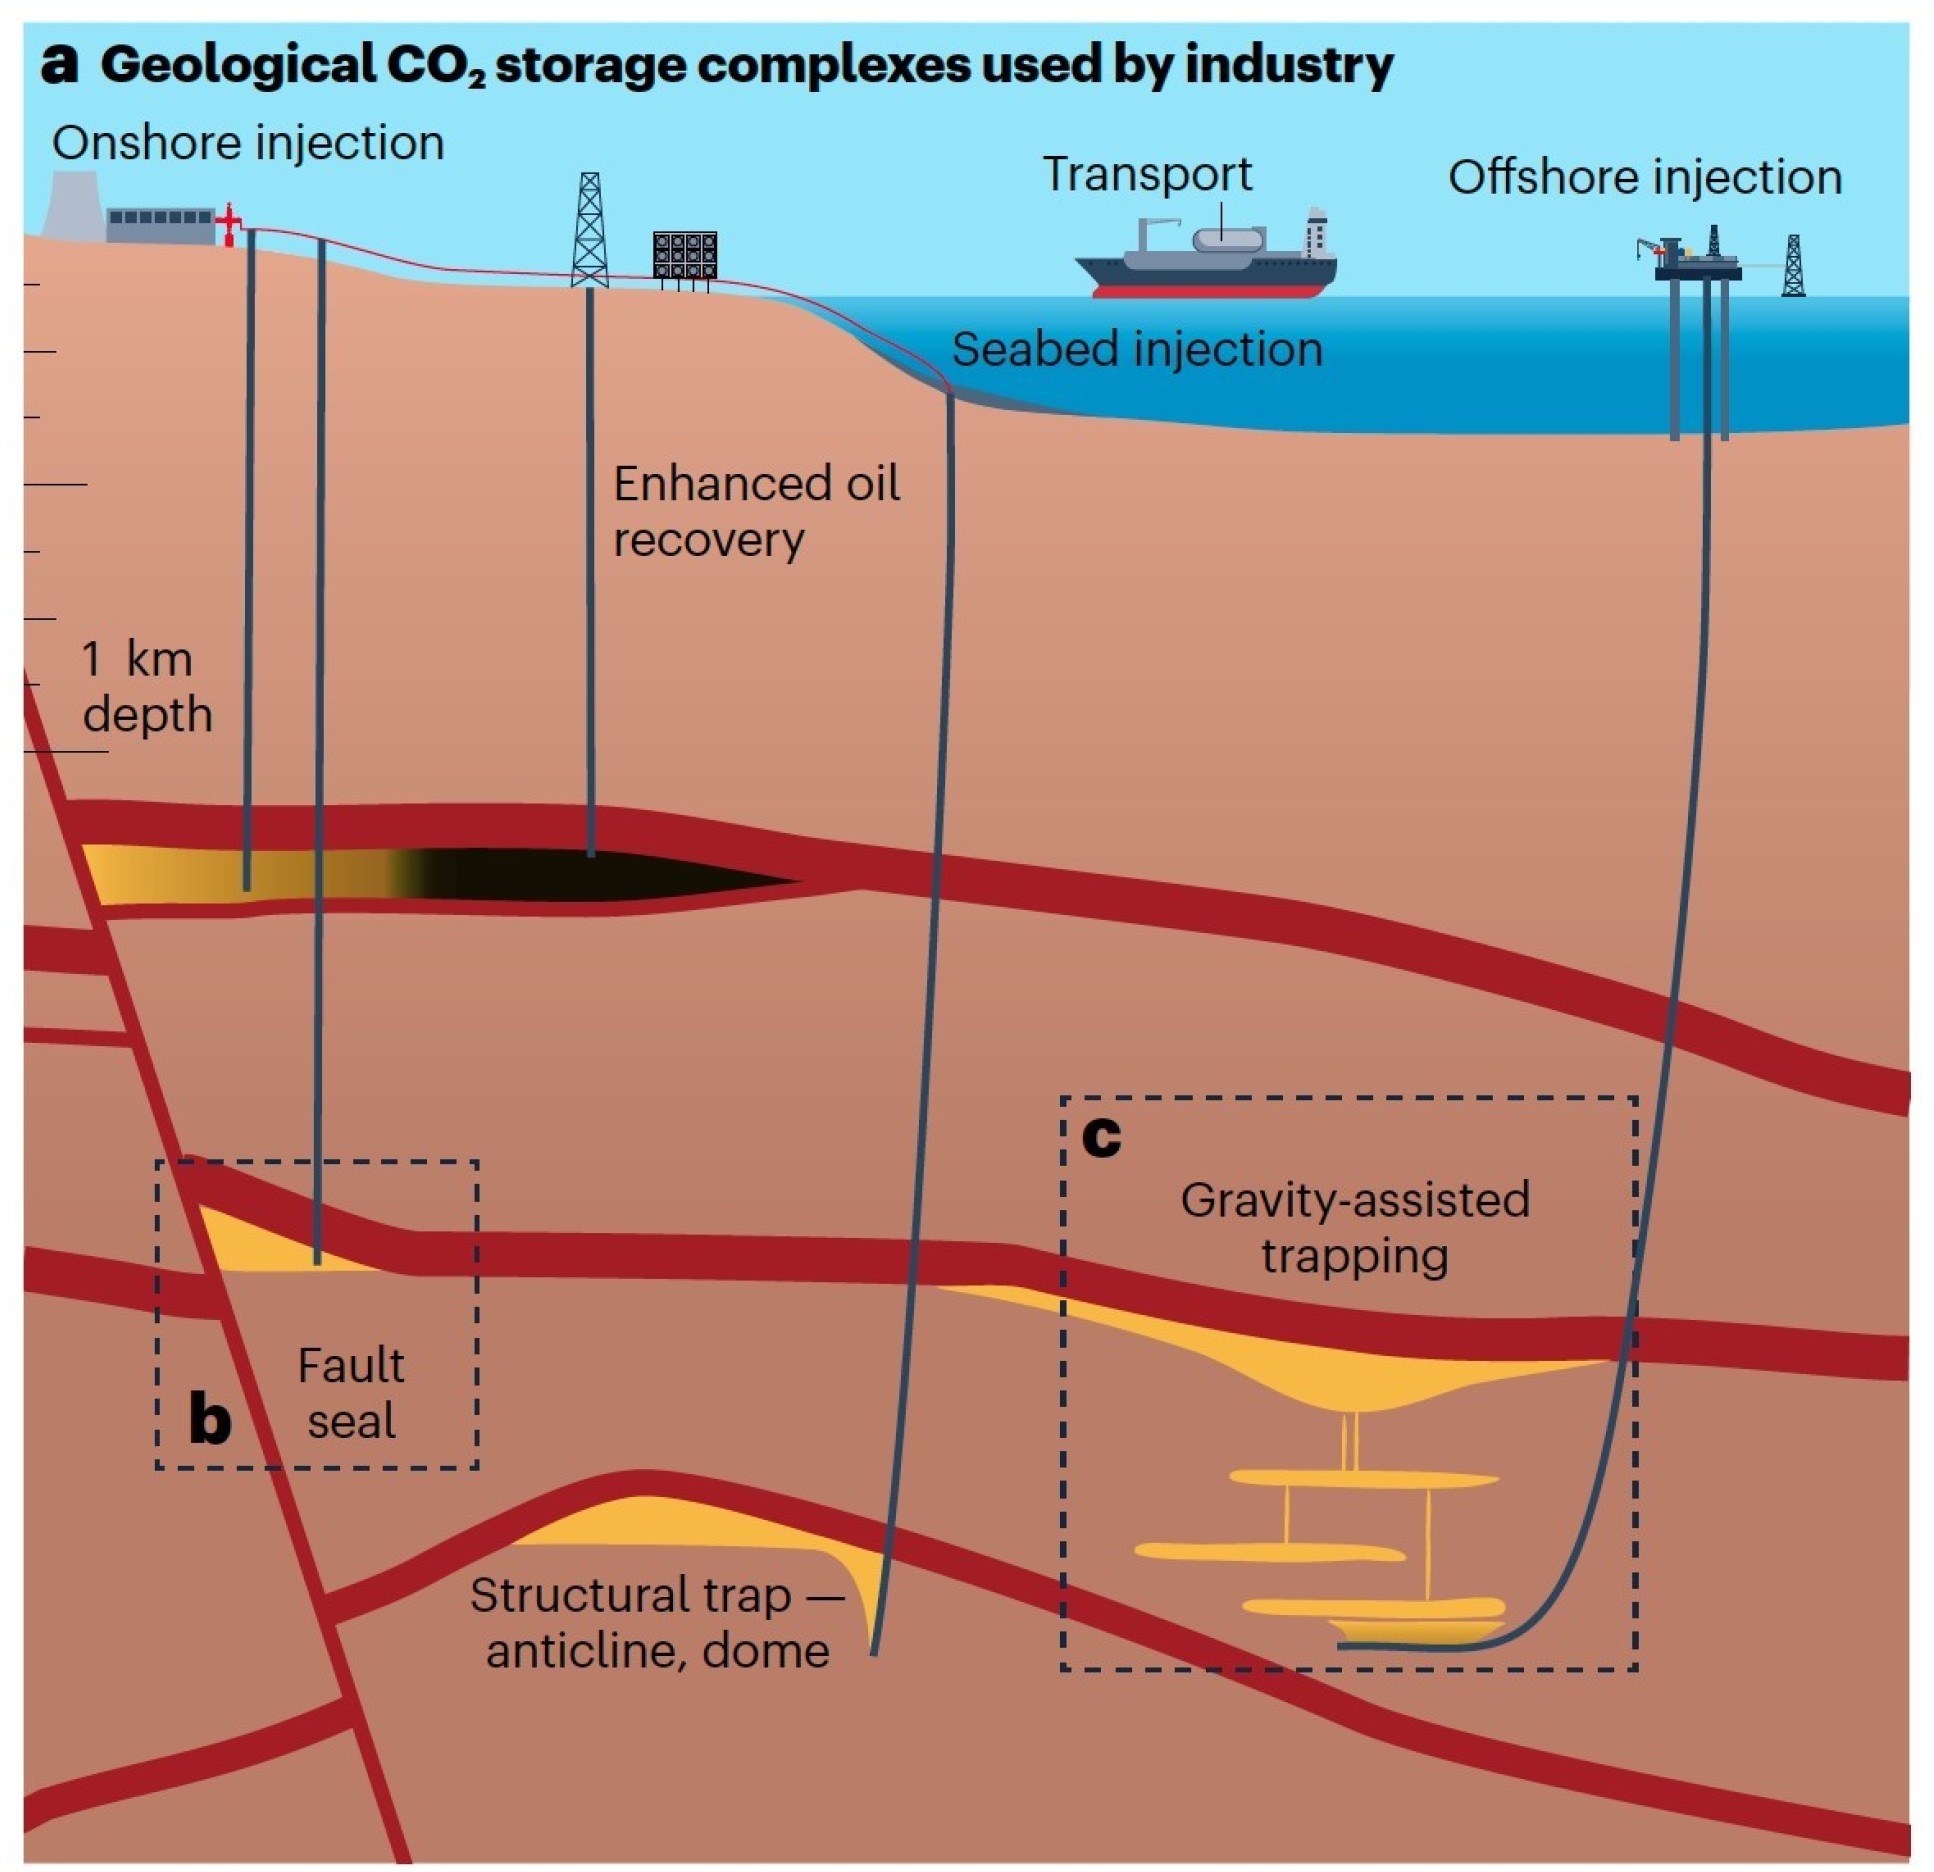 Two dimensional diagram of 'geological carbon dioxide storage complexes used by industry'